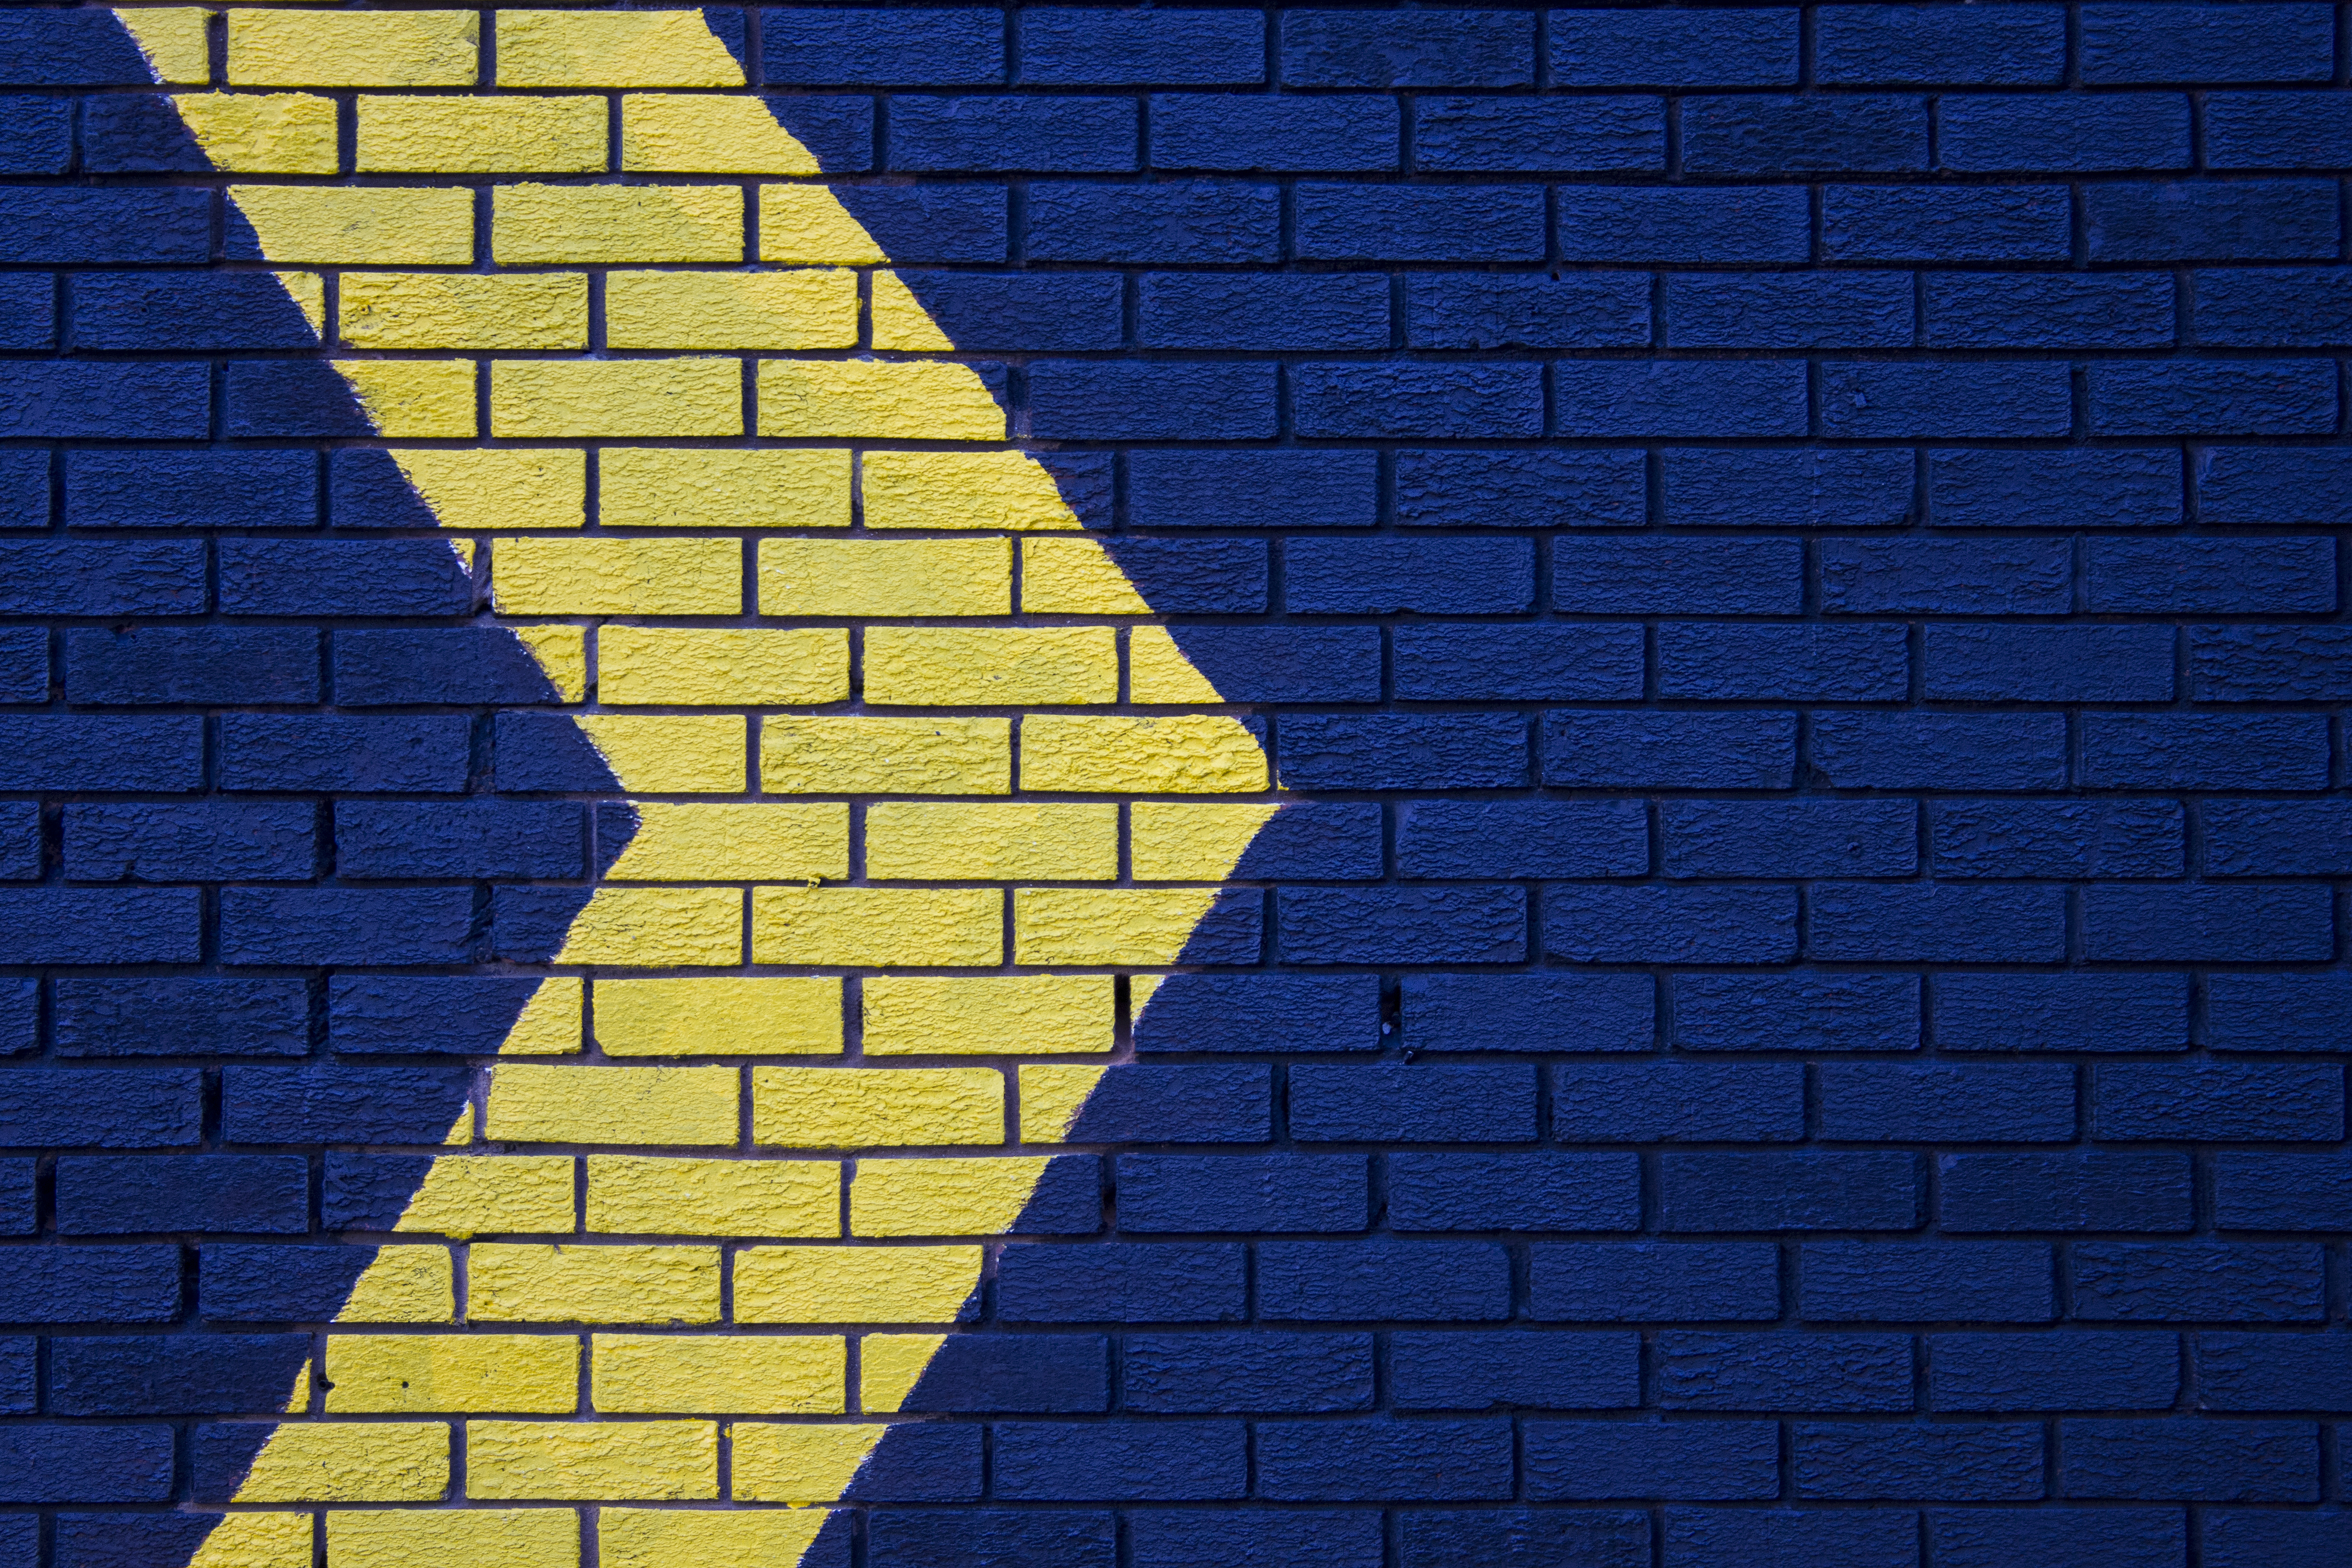 59364 download wallpaper texture, arrow, yellow, blue, textures, wall, pointer, direction, brick screensavers and pictures for free